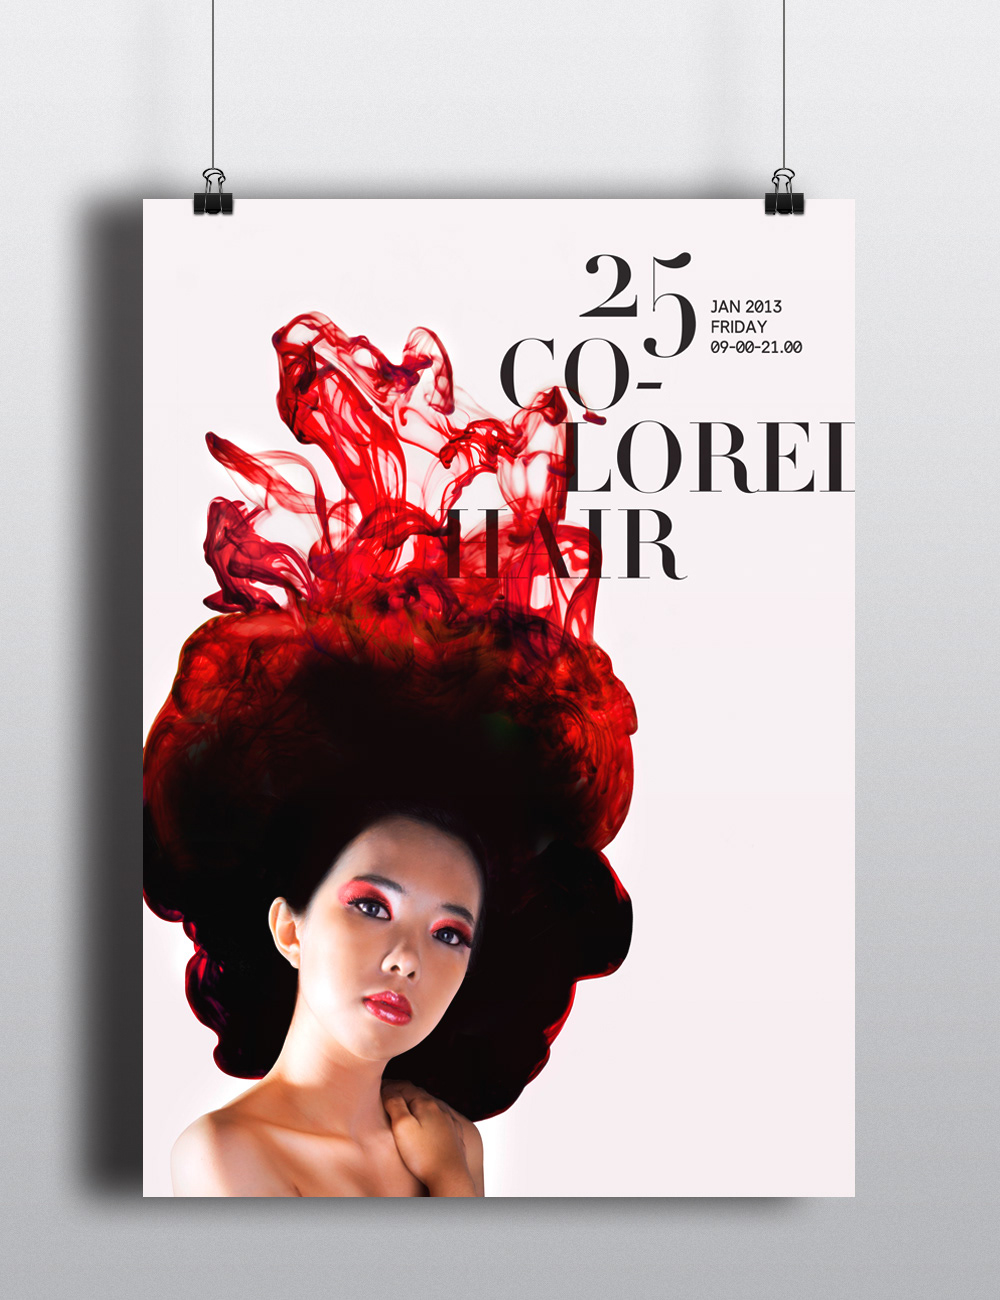 hair beauty Event girl Promotion ANNUAL logo poster Web ticket paper